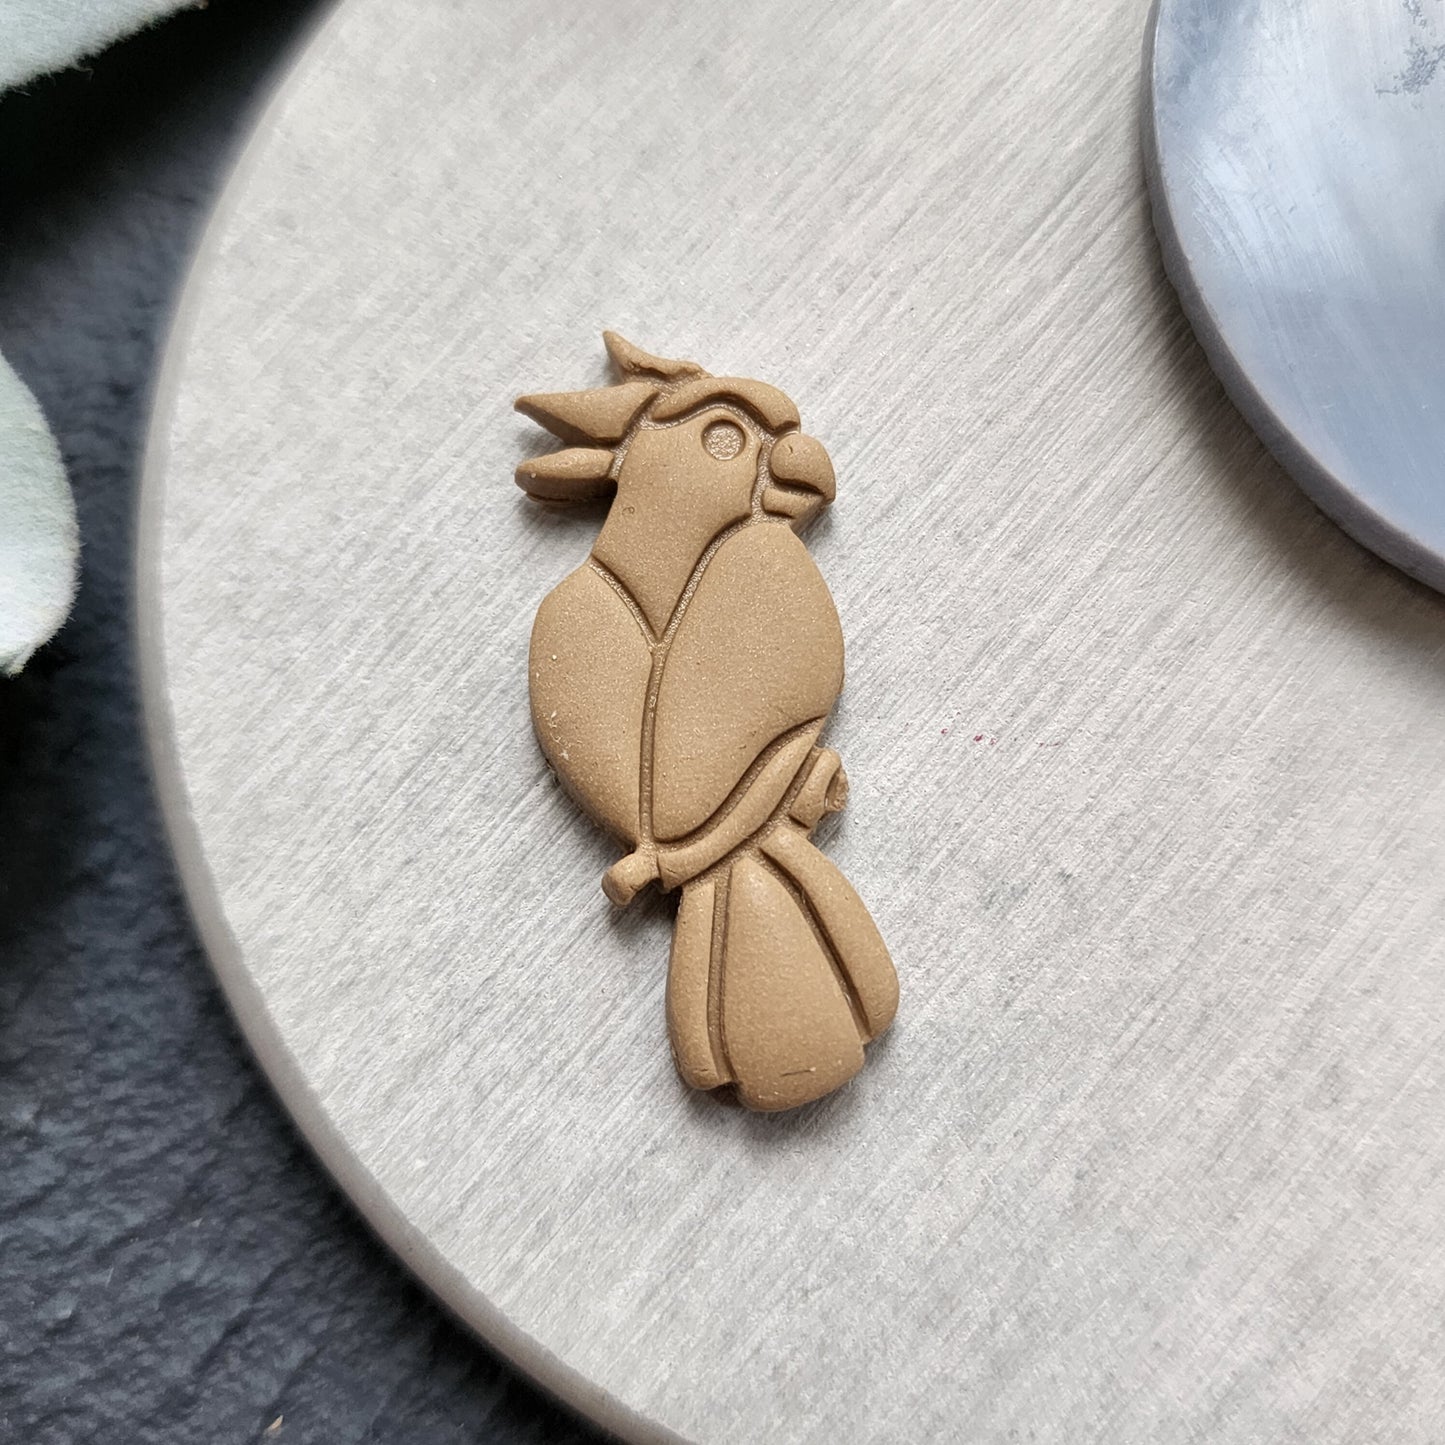 Polymer Clay cutters "Parrot" Earrings sharp clay cutter stamp Jewelry cutters Earrings molds Polymer clay tool Clay supplies Summer cutters